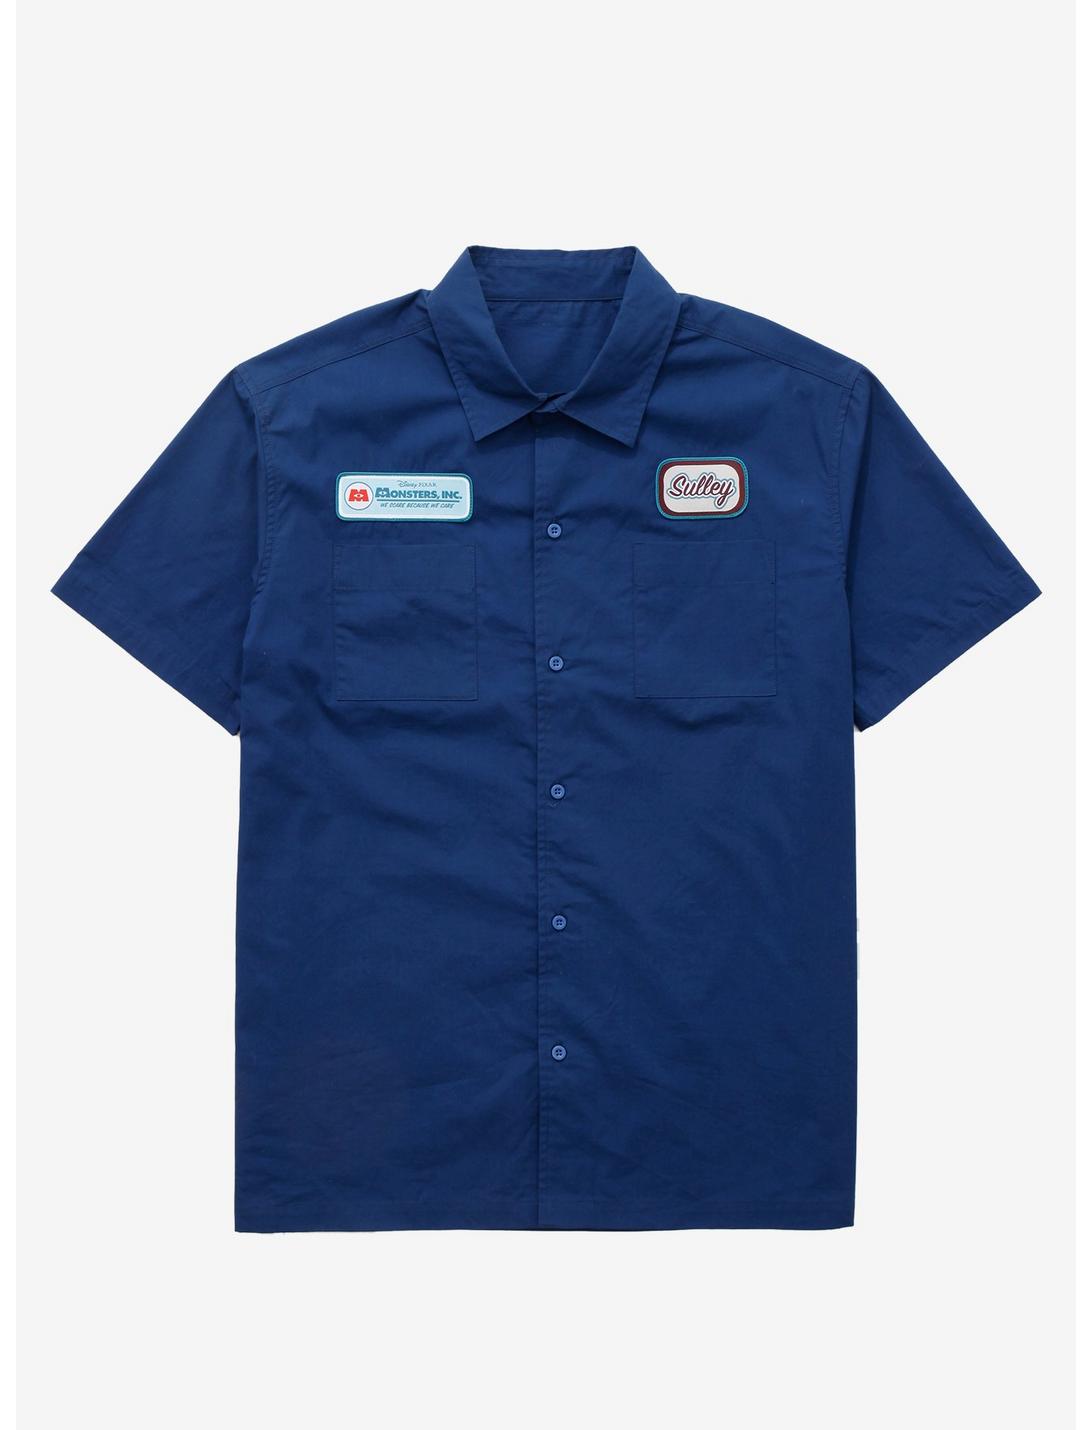 Disney Pixar Monsters, Inc. Scream Team Woven Button-Up - BoxLunch Exclusive, BLUE, hi-res